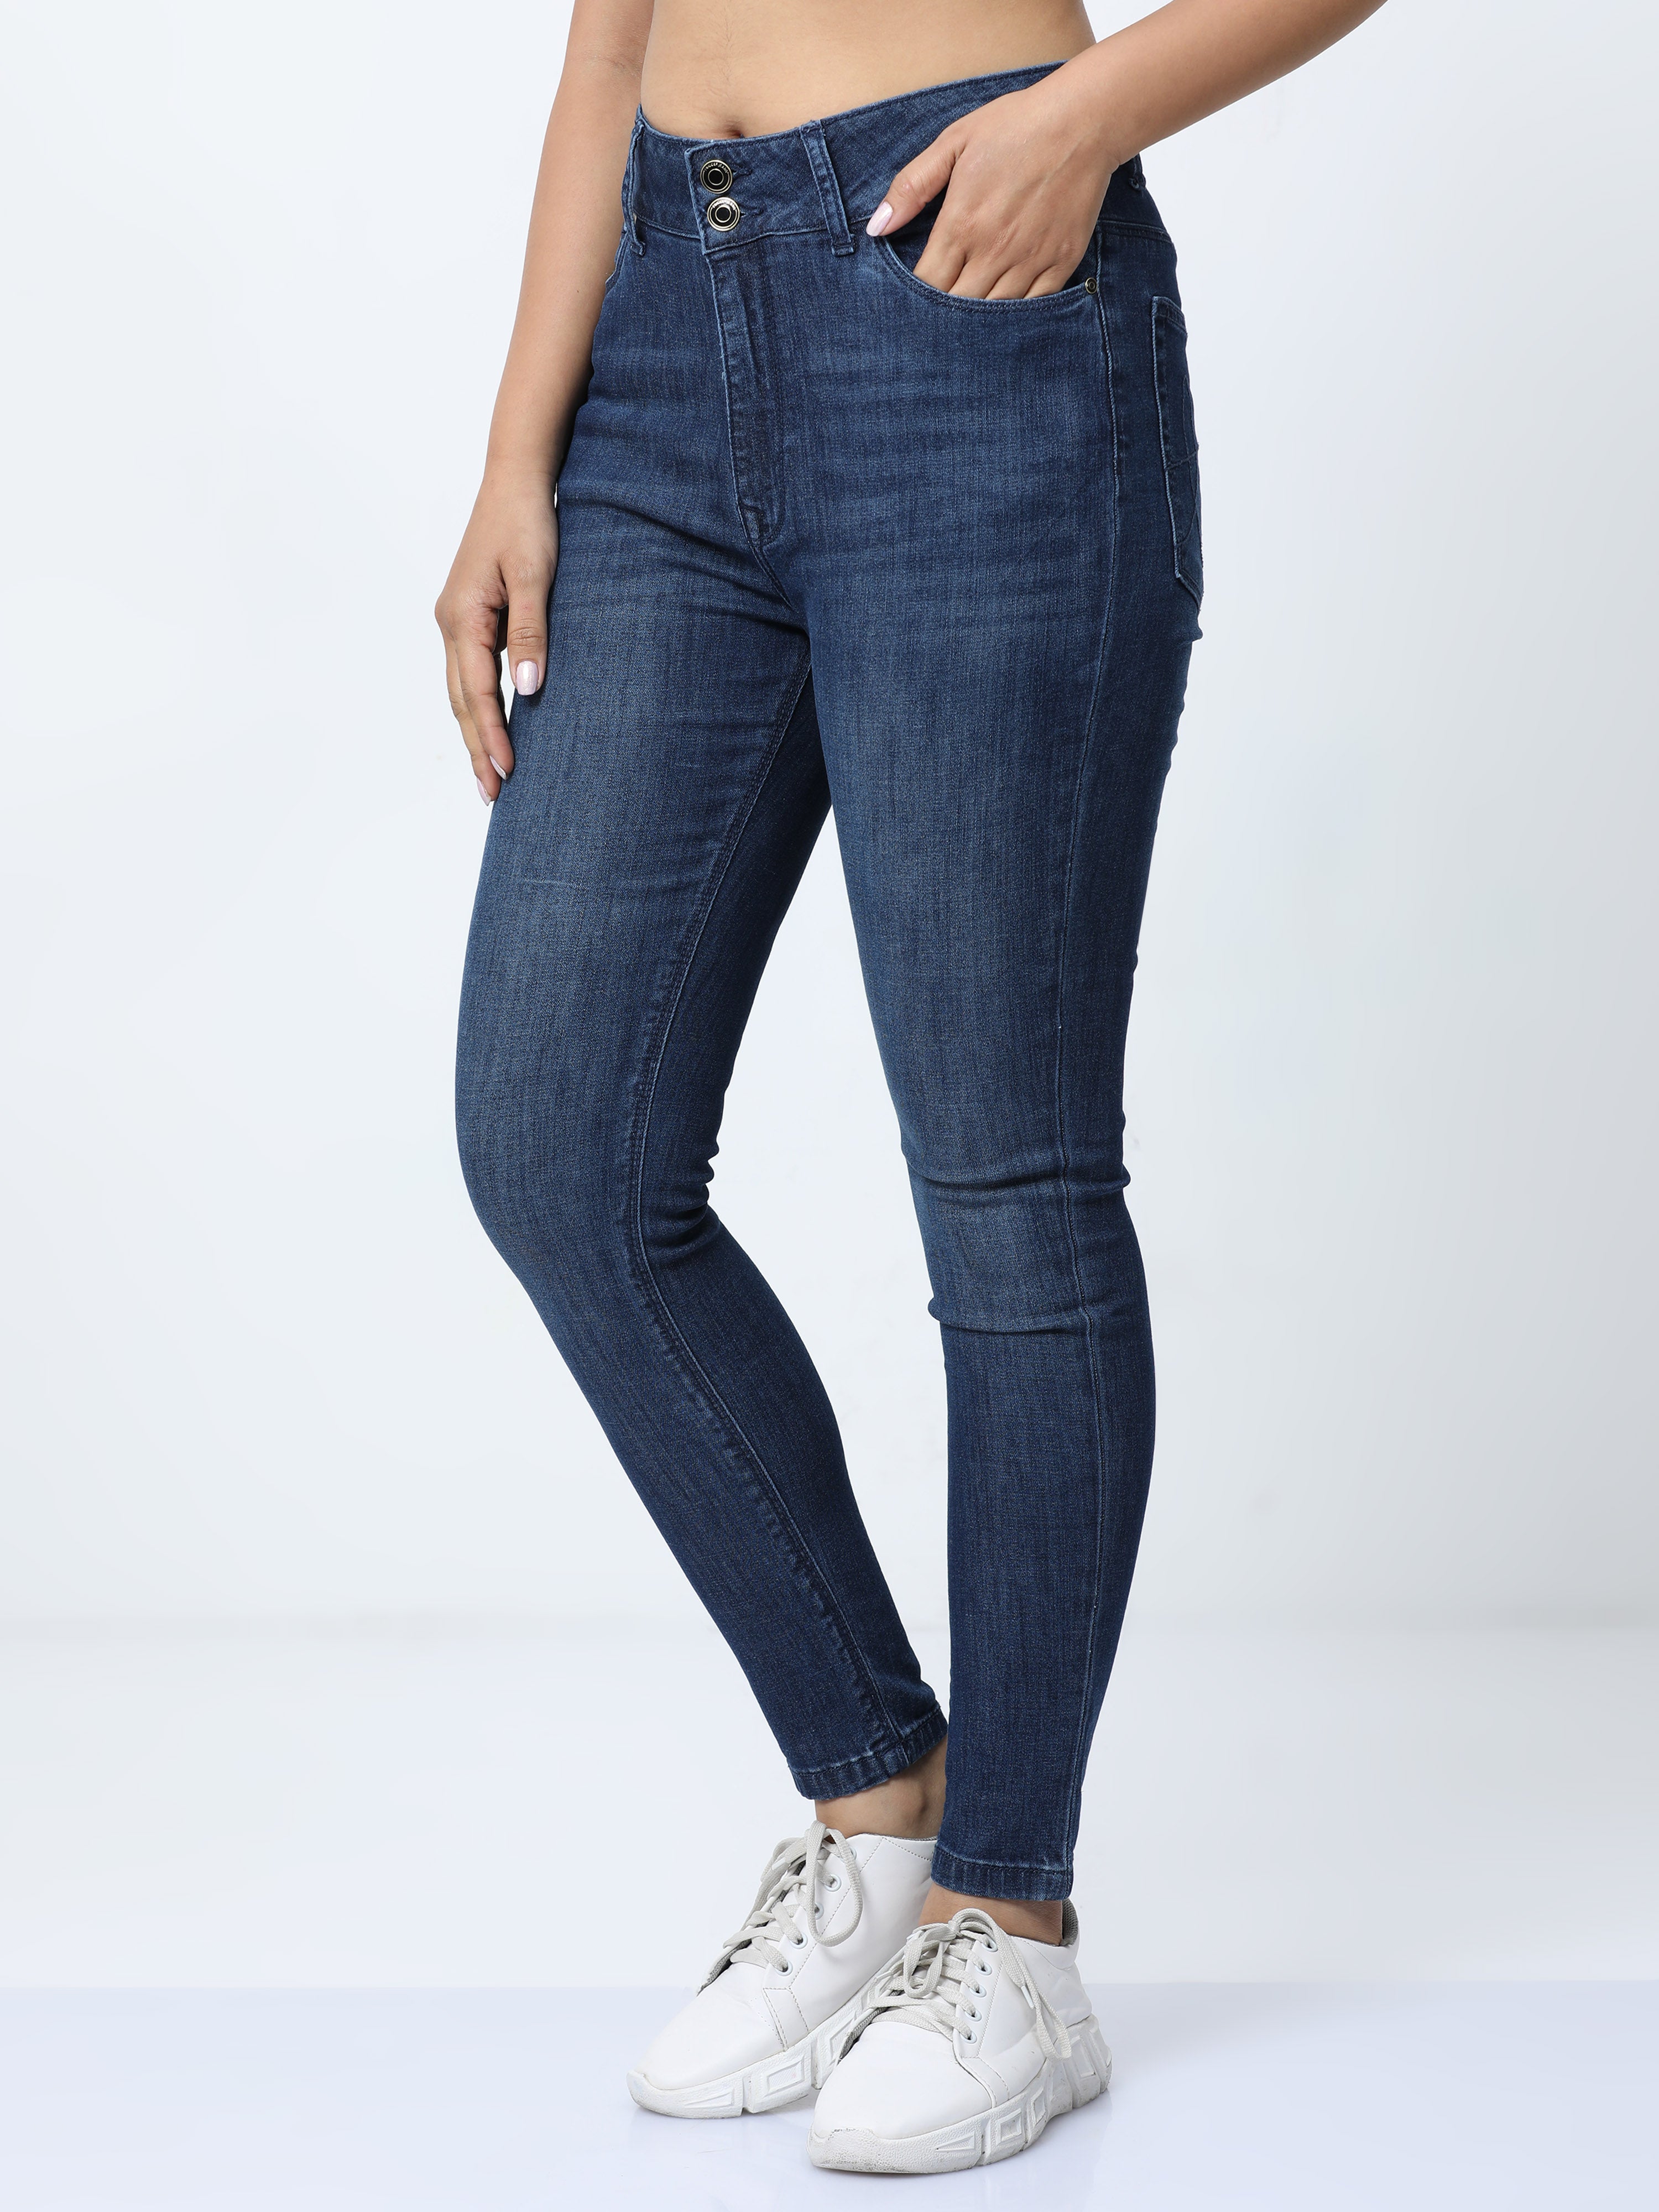 Berry Heavy enzymes womens slim fit jeans